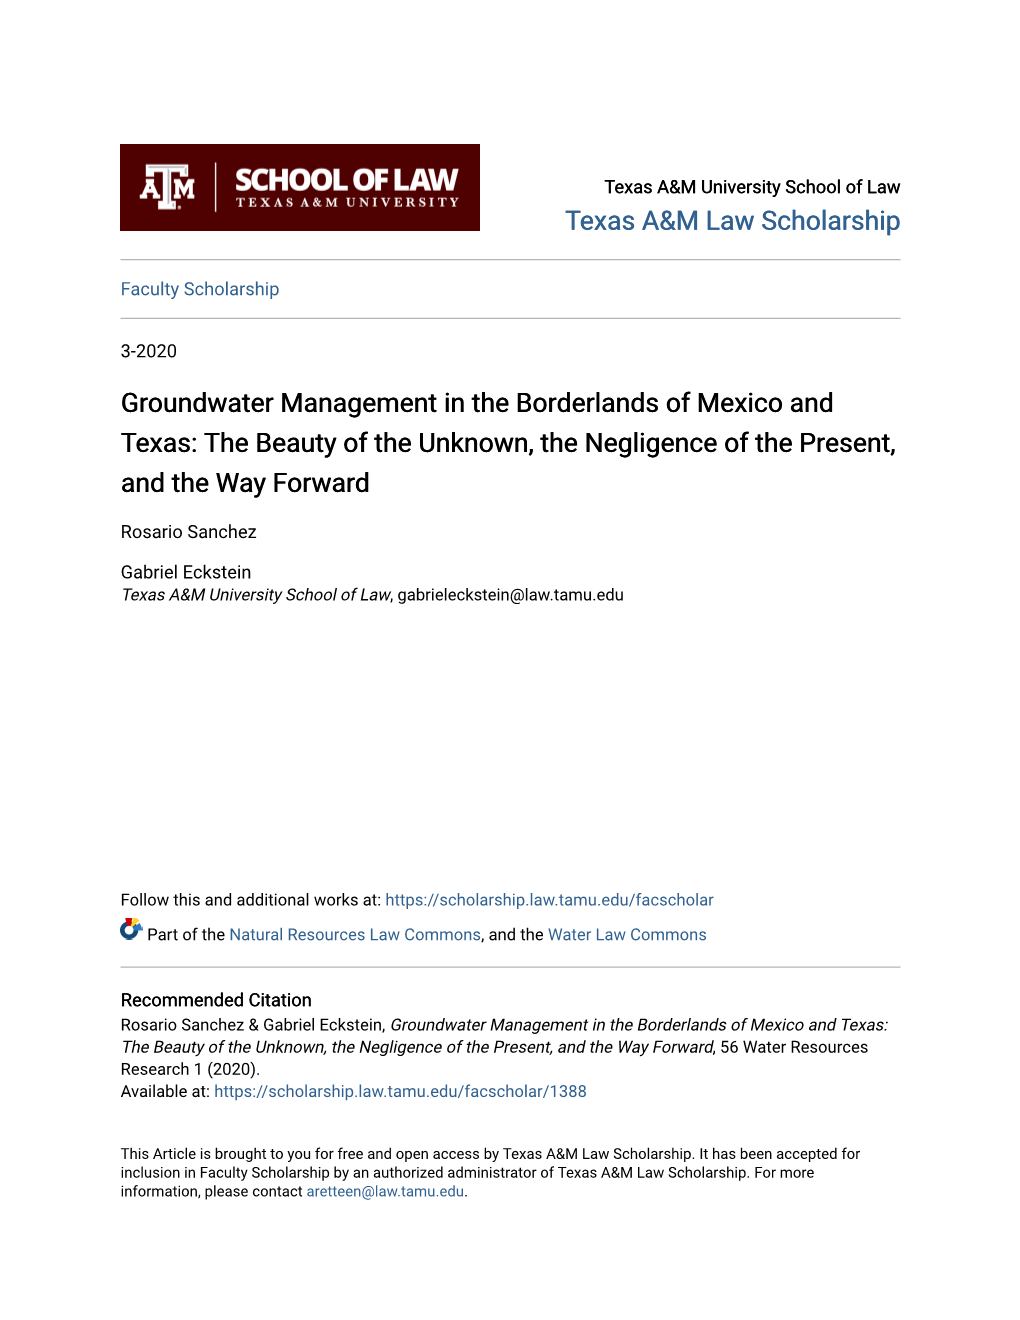 Groundwater Management in the Borderlands of Mexico and Texas: the Beauty of the Unknown, the Negligence of the Present, and the Way Forward